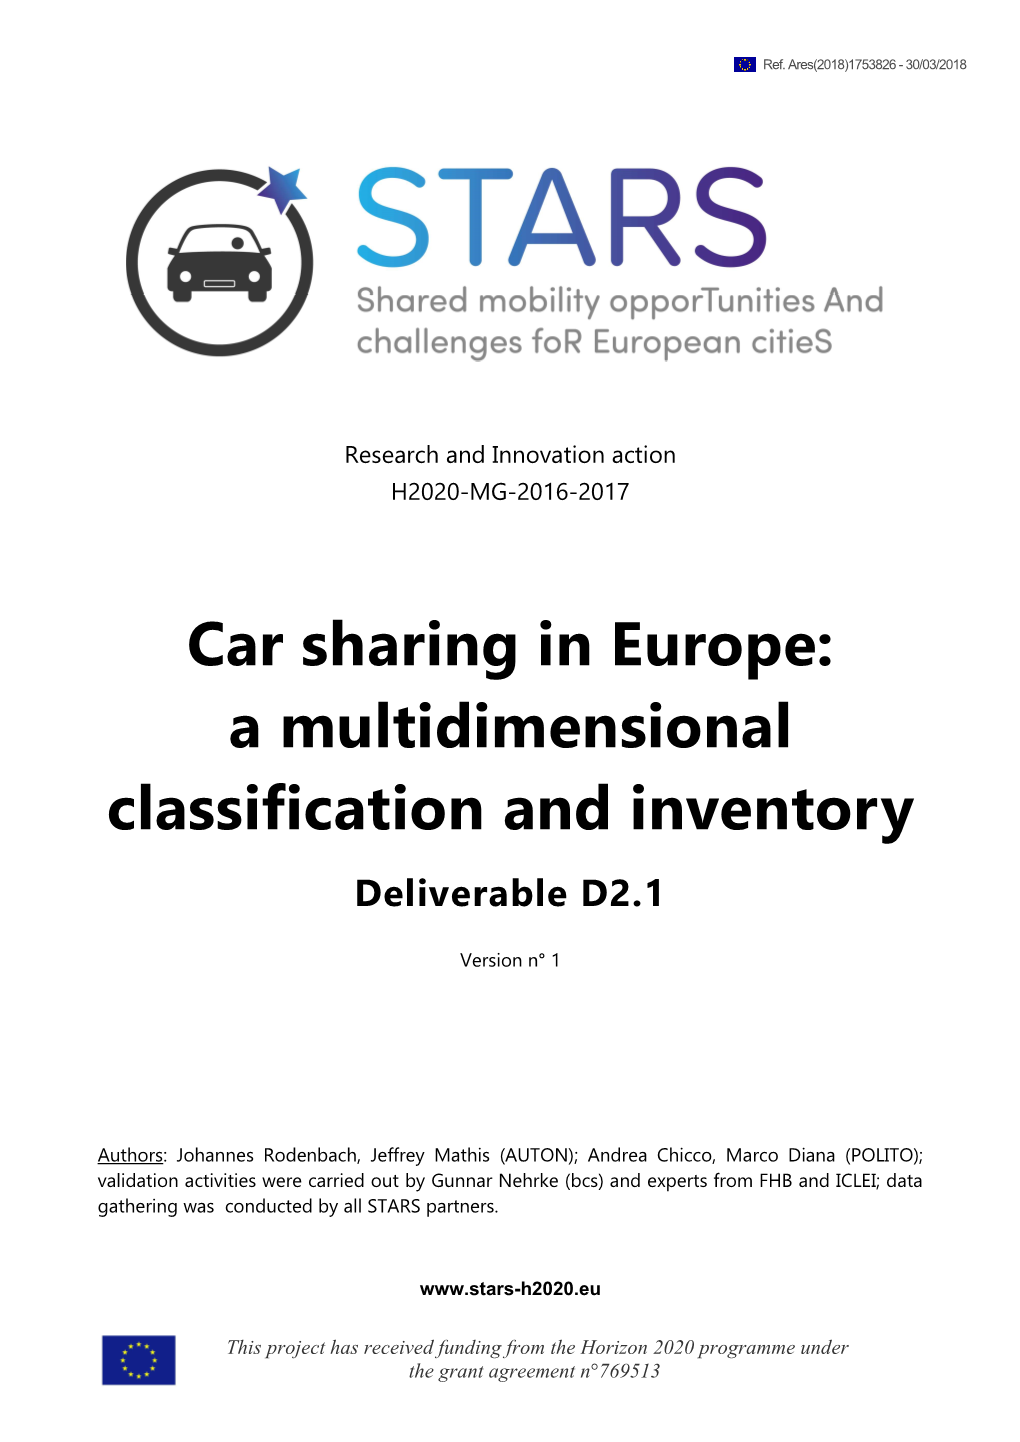 Car Sharing in Europe: a Multidimensional Classification and Inventory Deliverable D2.1